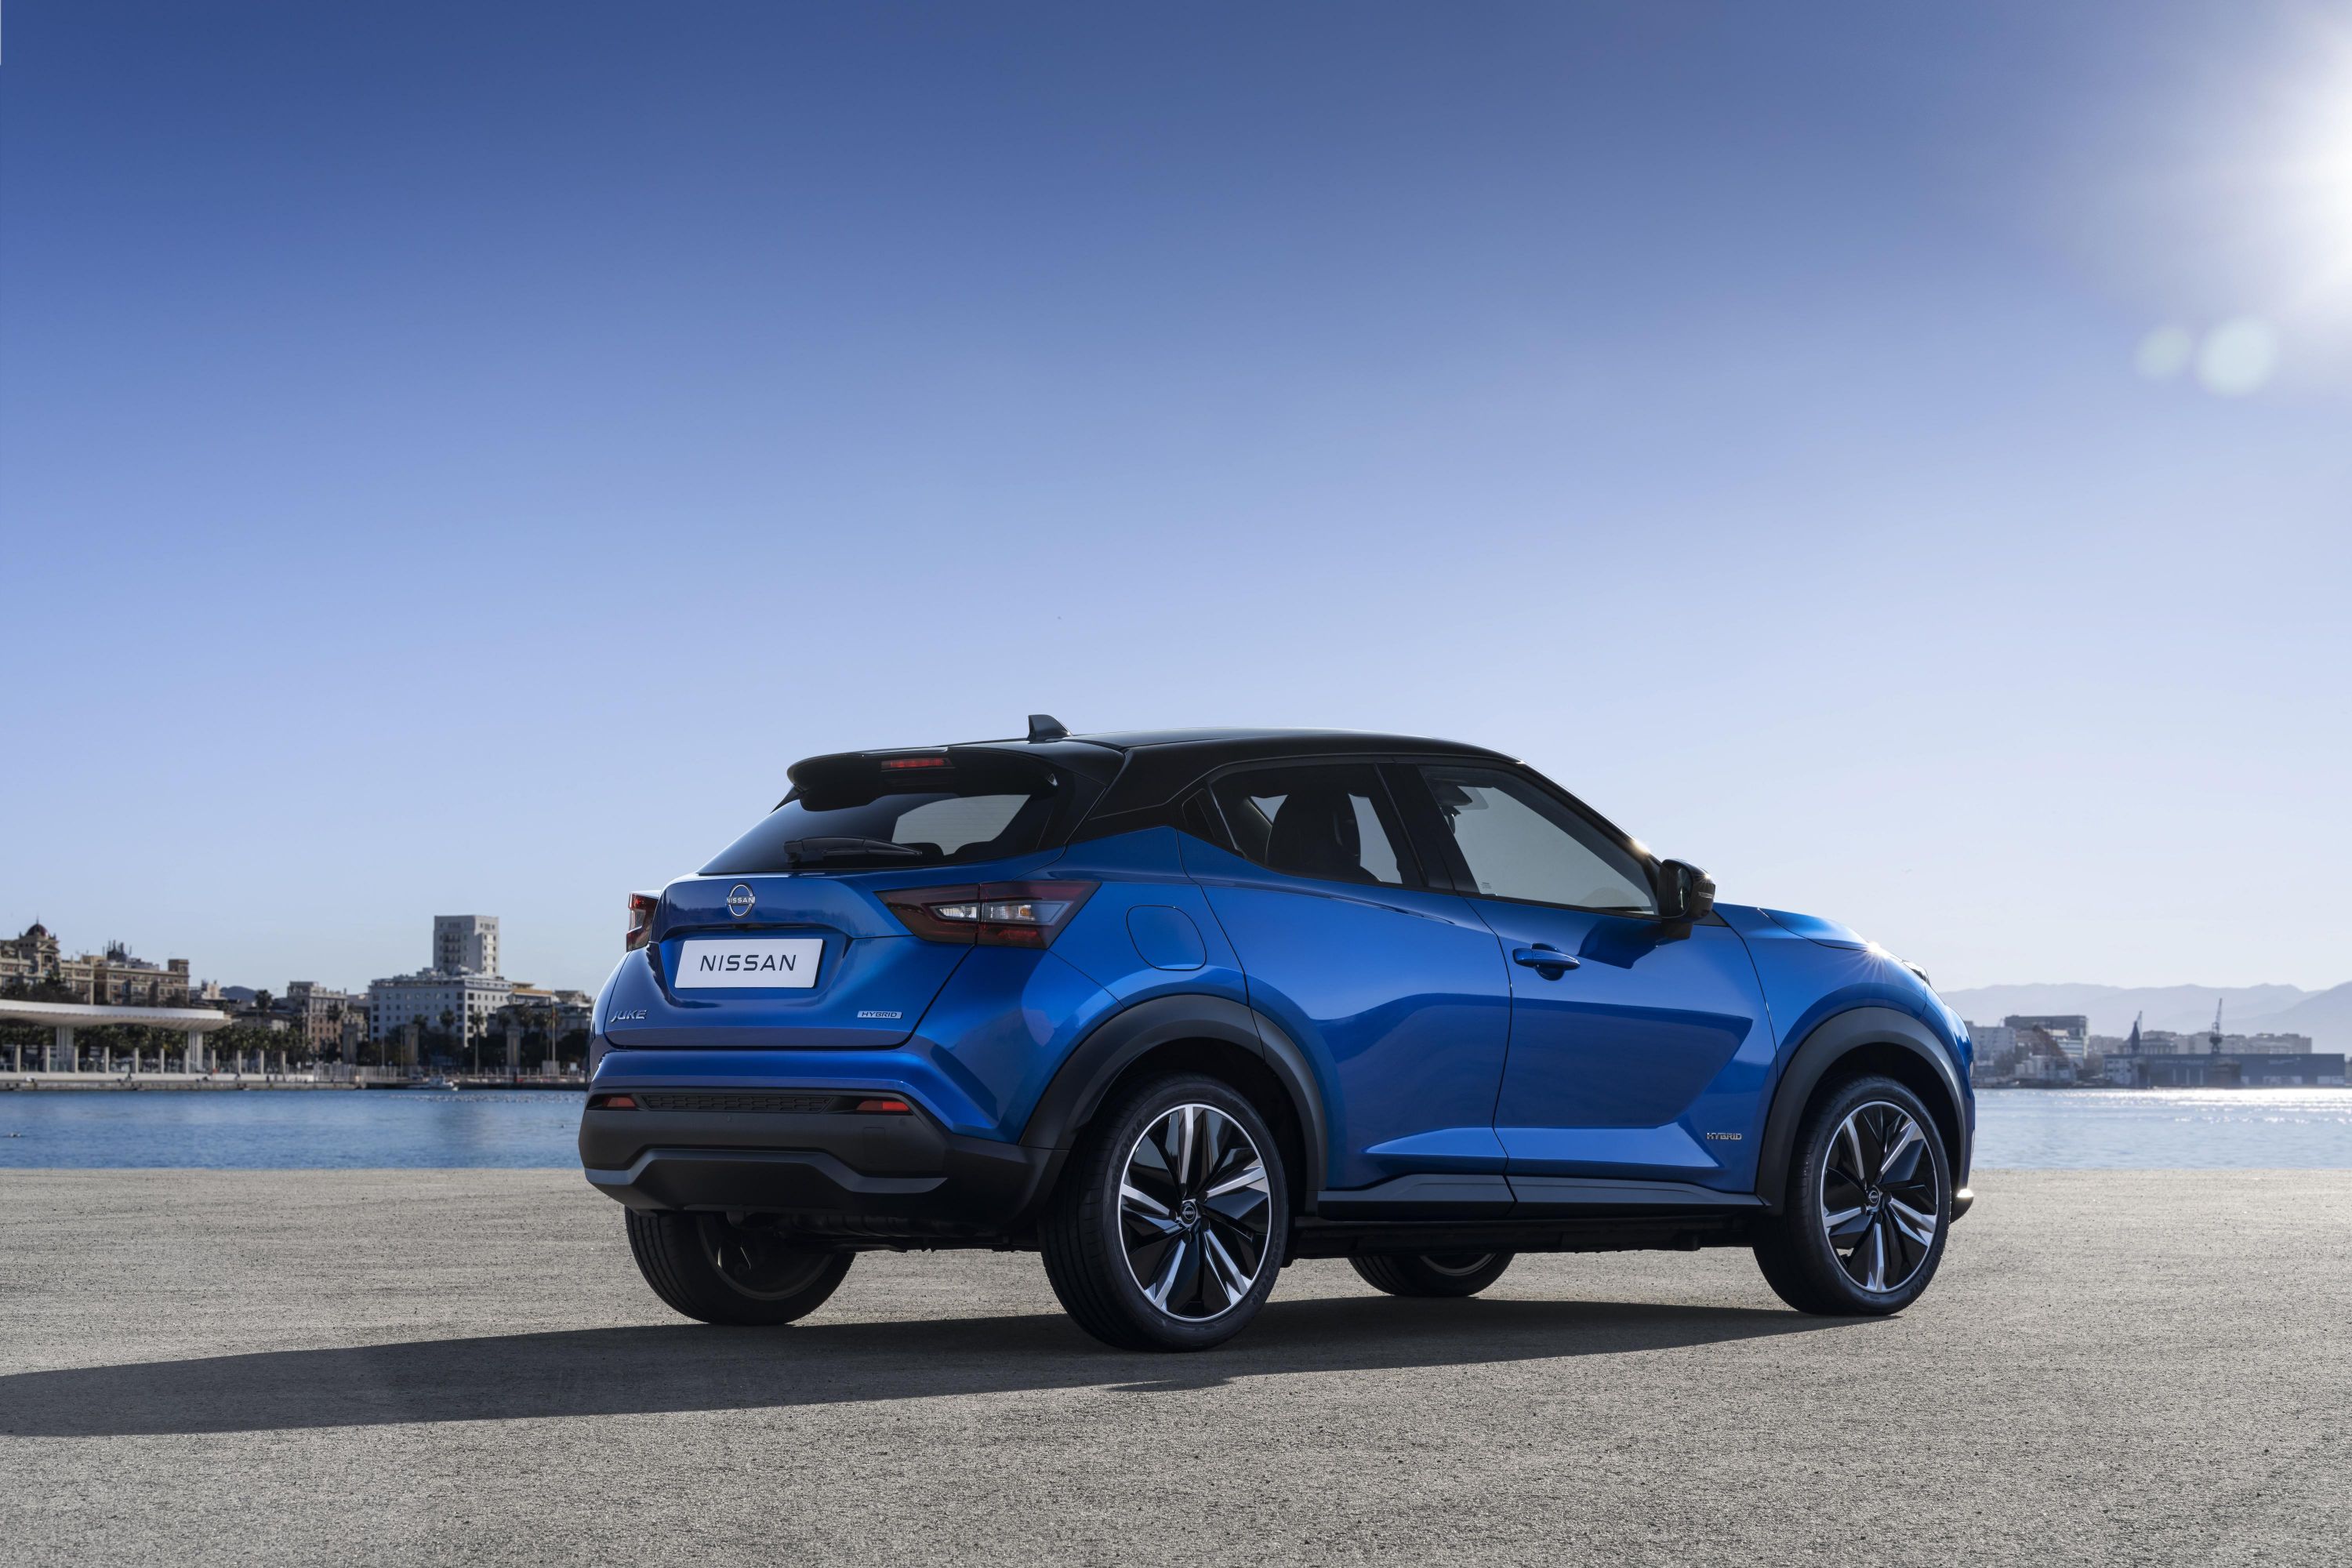 Nissan Juke will be first model based on new small-car platform